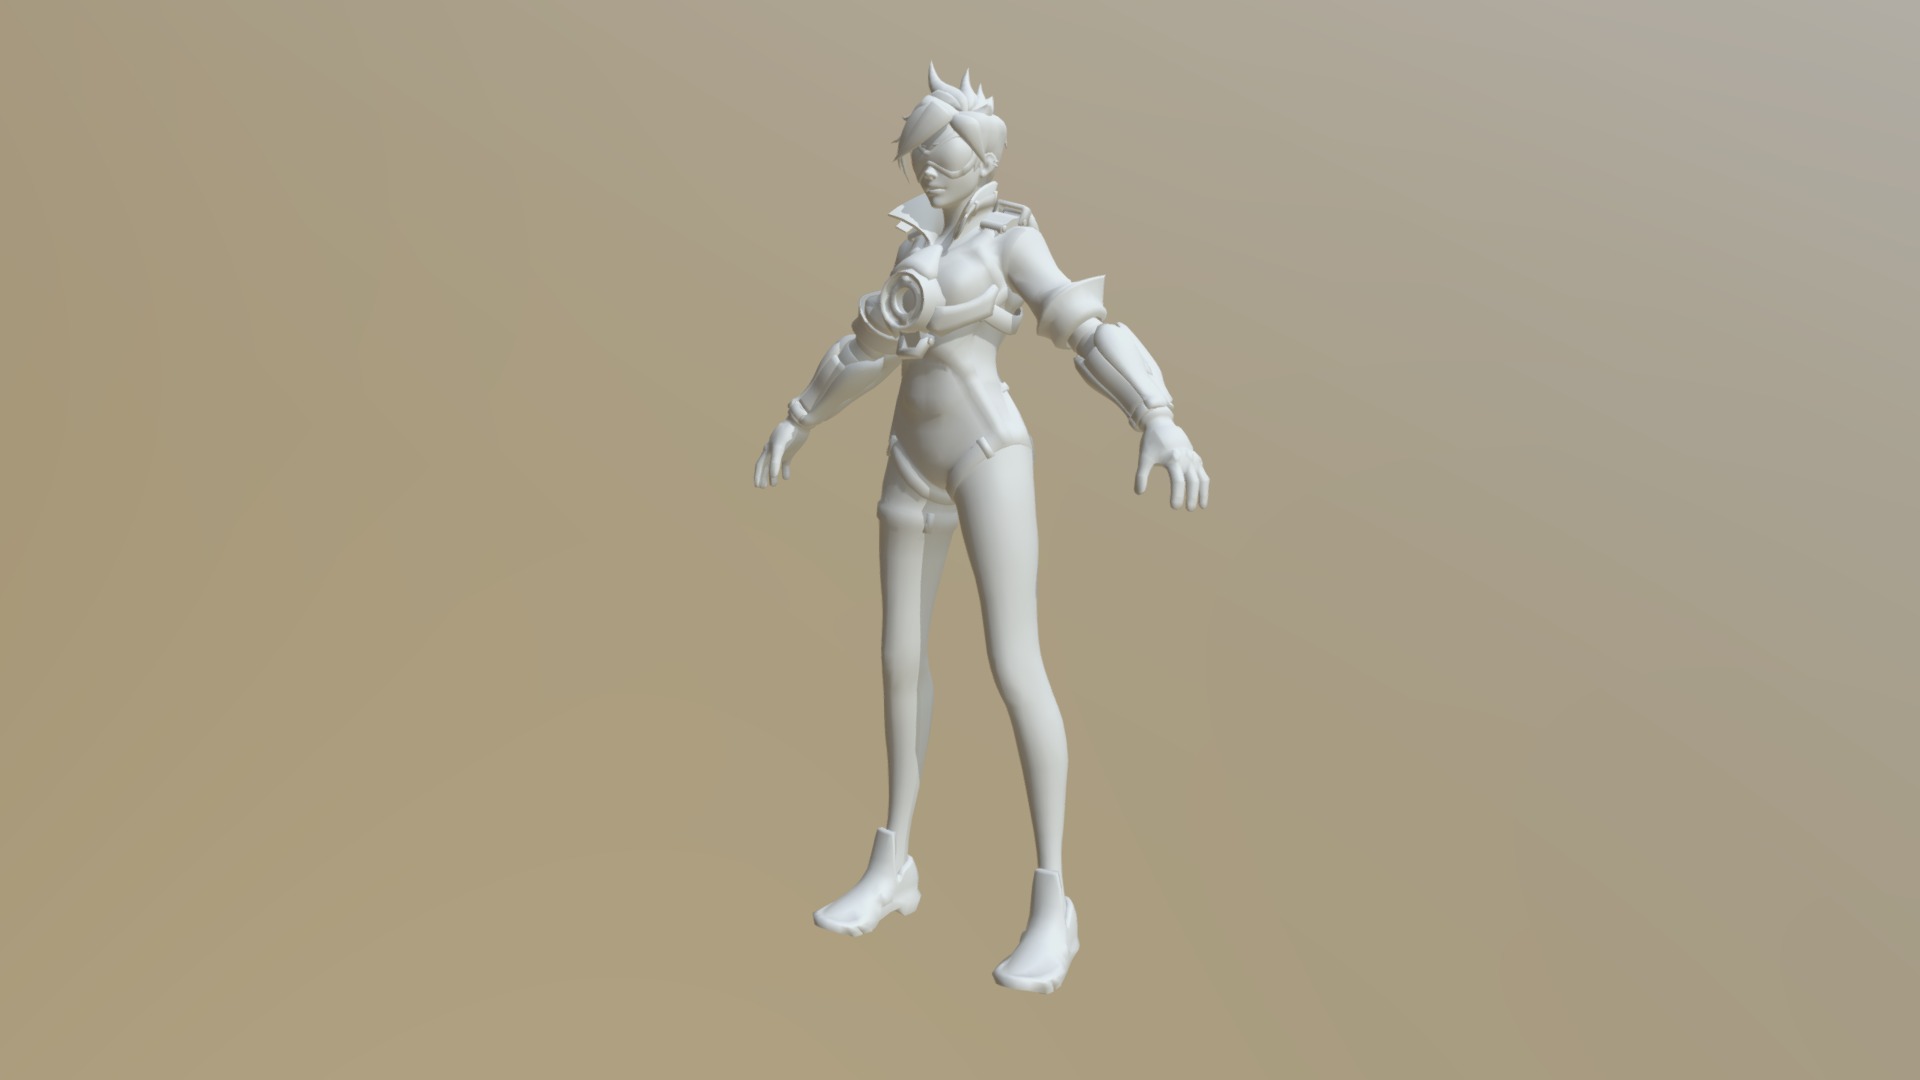 Hello !
I share today this Tracer model that comes from Overwatch. This template can be used in Blender.
Why Sharing in Blender? Not enough people sharing files blender ;)
Fan of blender and overwatch, it's a gift ! - Tracer overwatch (textured) - Download Free 3D model by super_wix 3d model